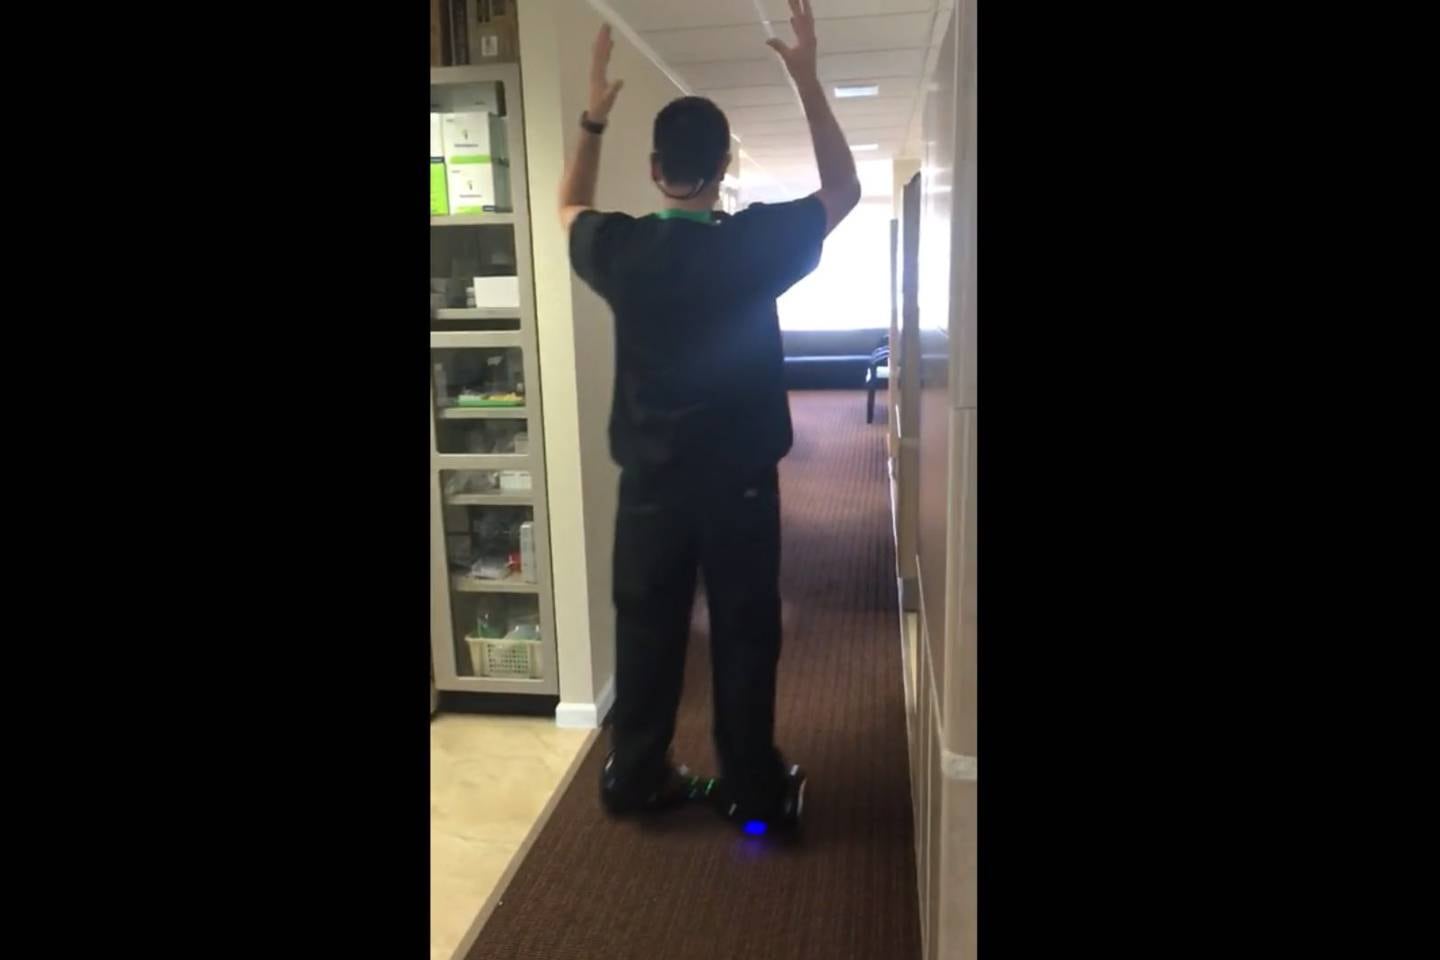  Seth Lookhart Dentist Hoverboard